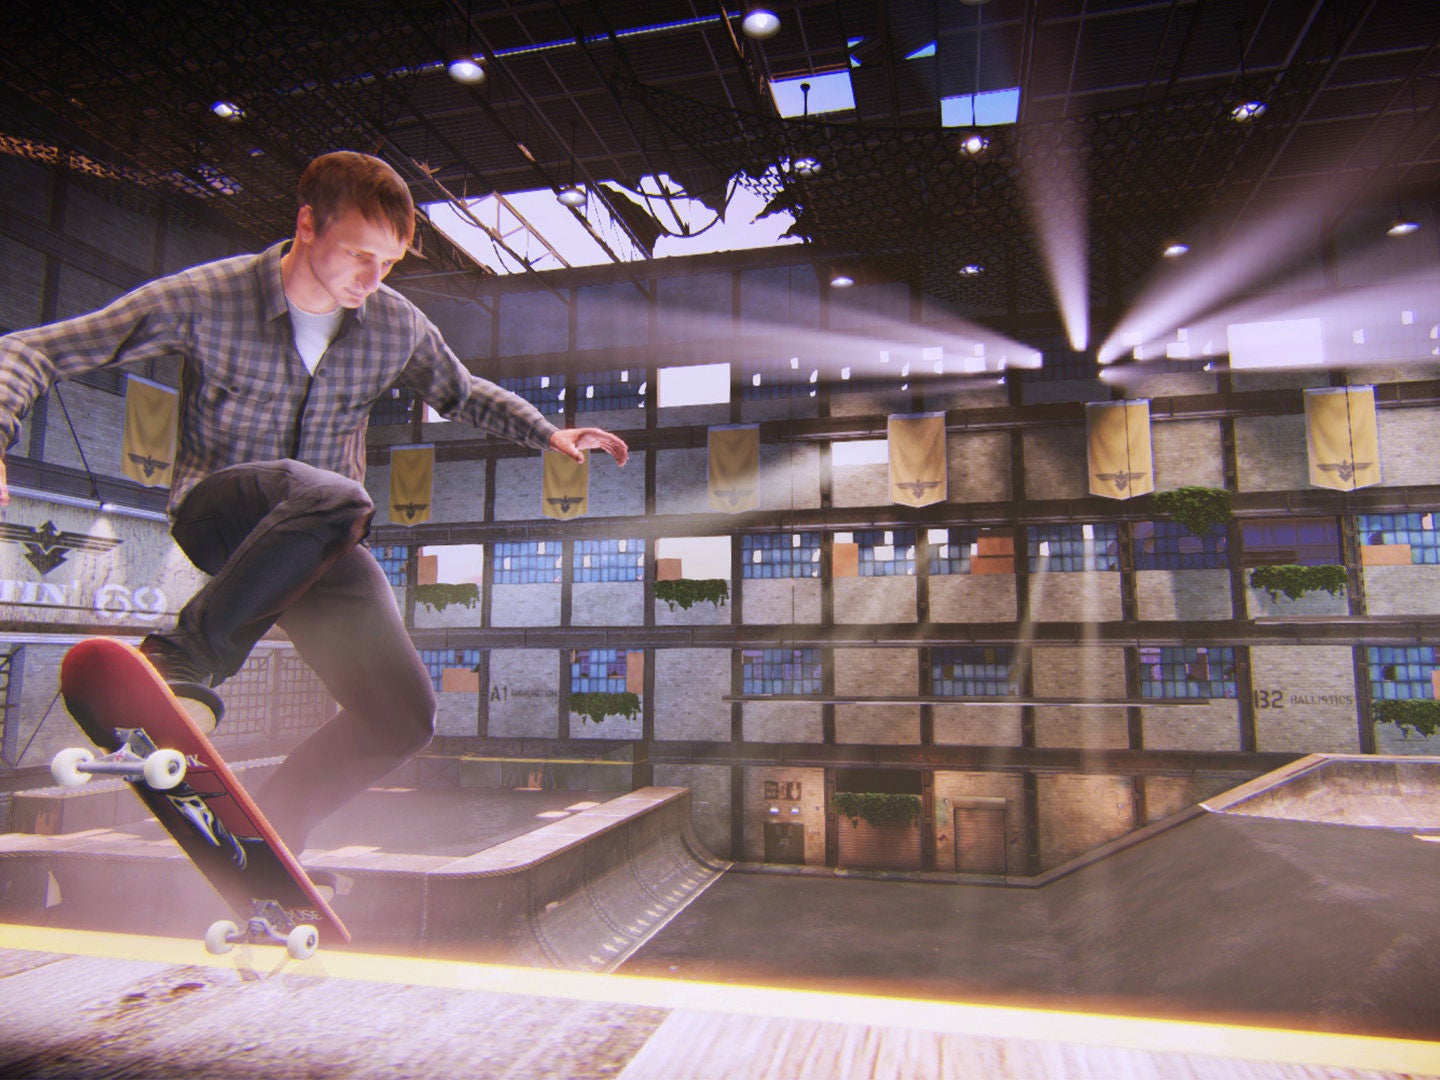 Tony Hawk Pro Skater 5 Review: Gameplay Videos, Features and